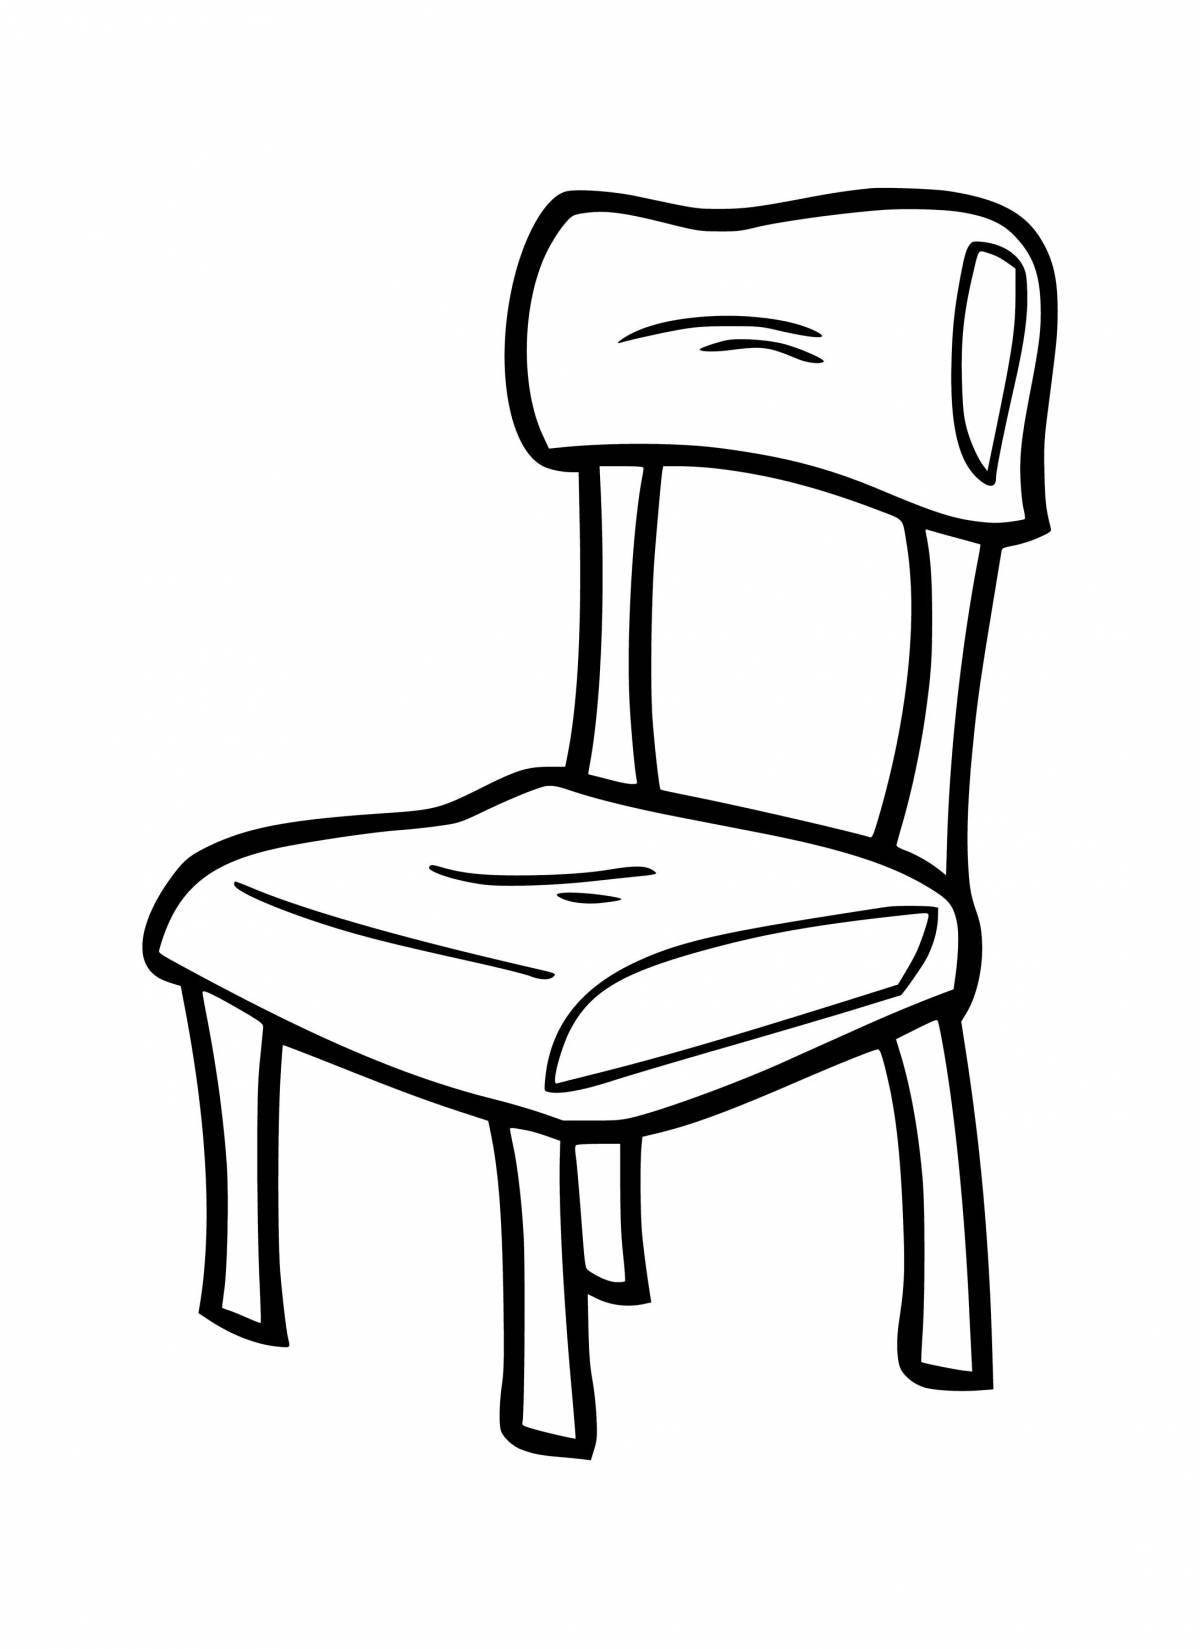 Coloring book gorgeous high chair